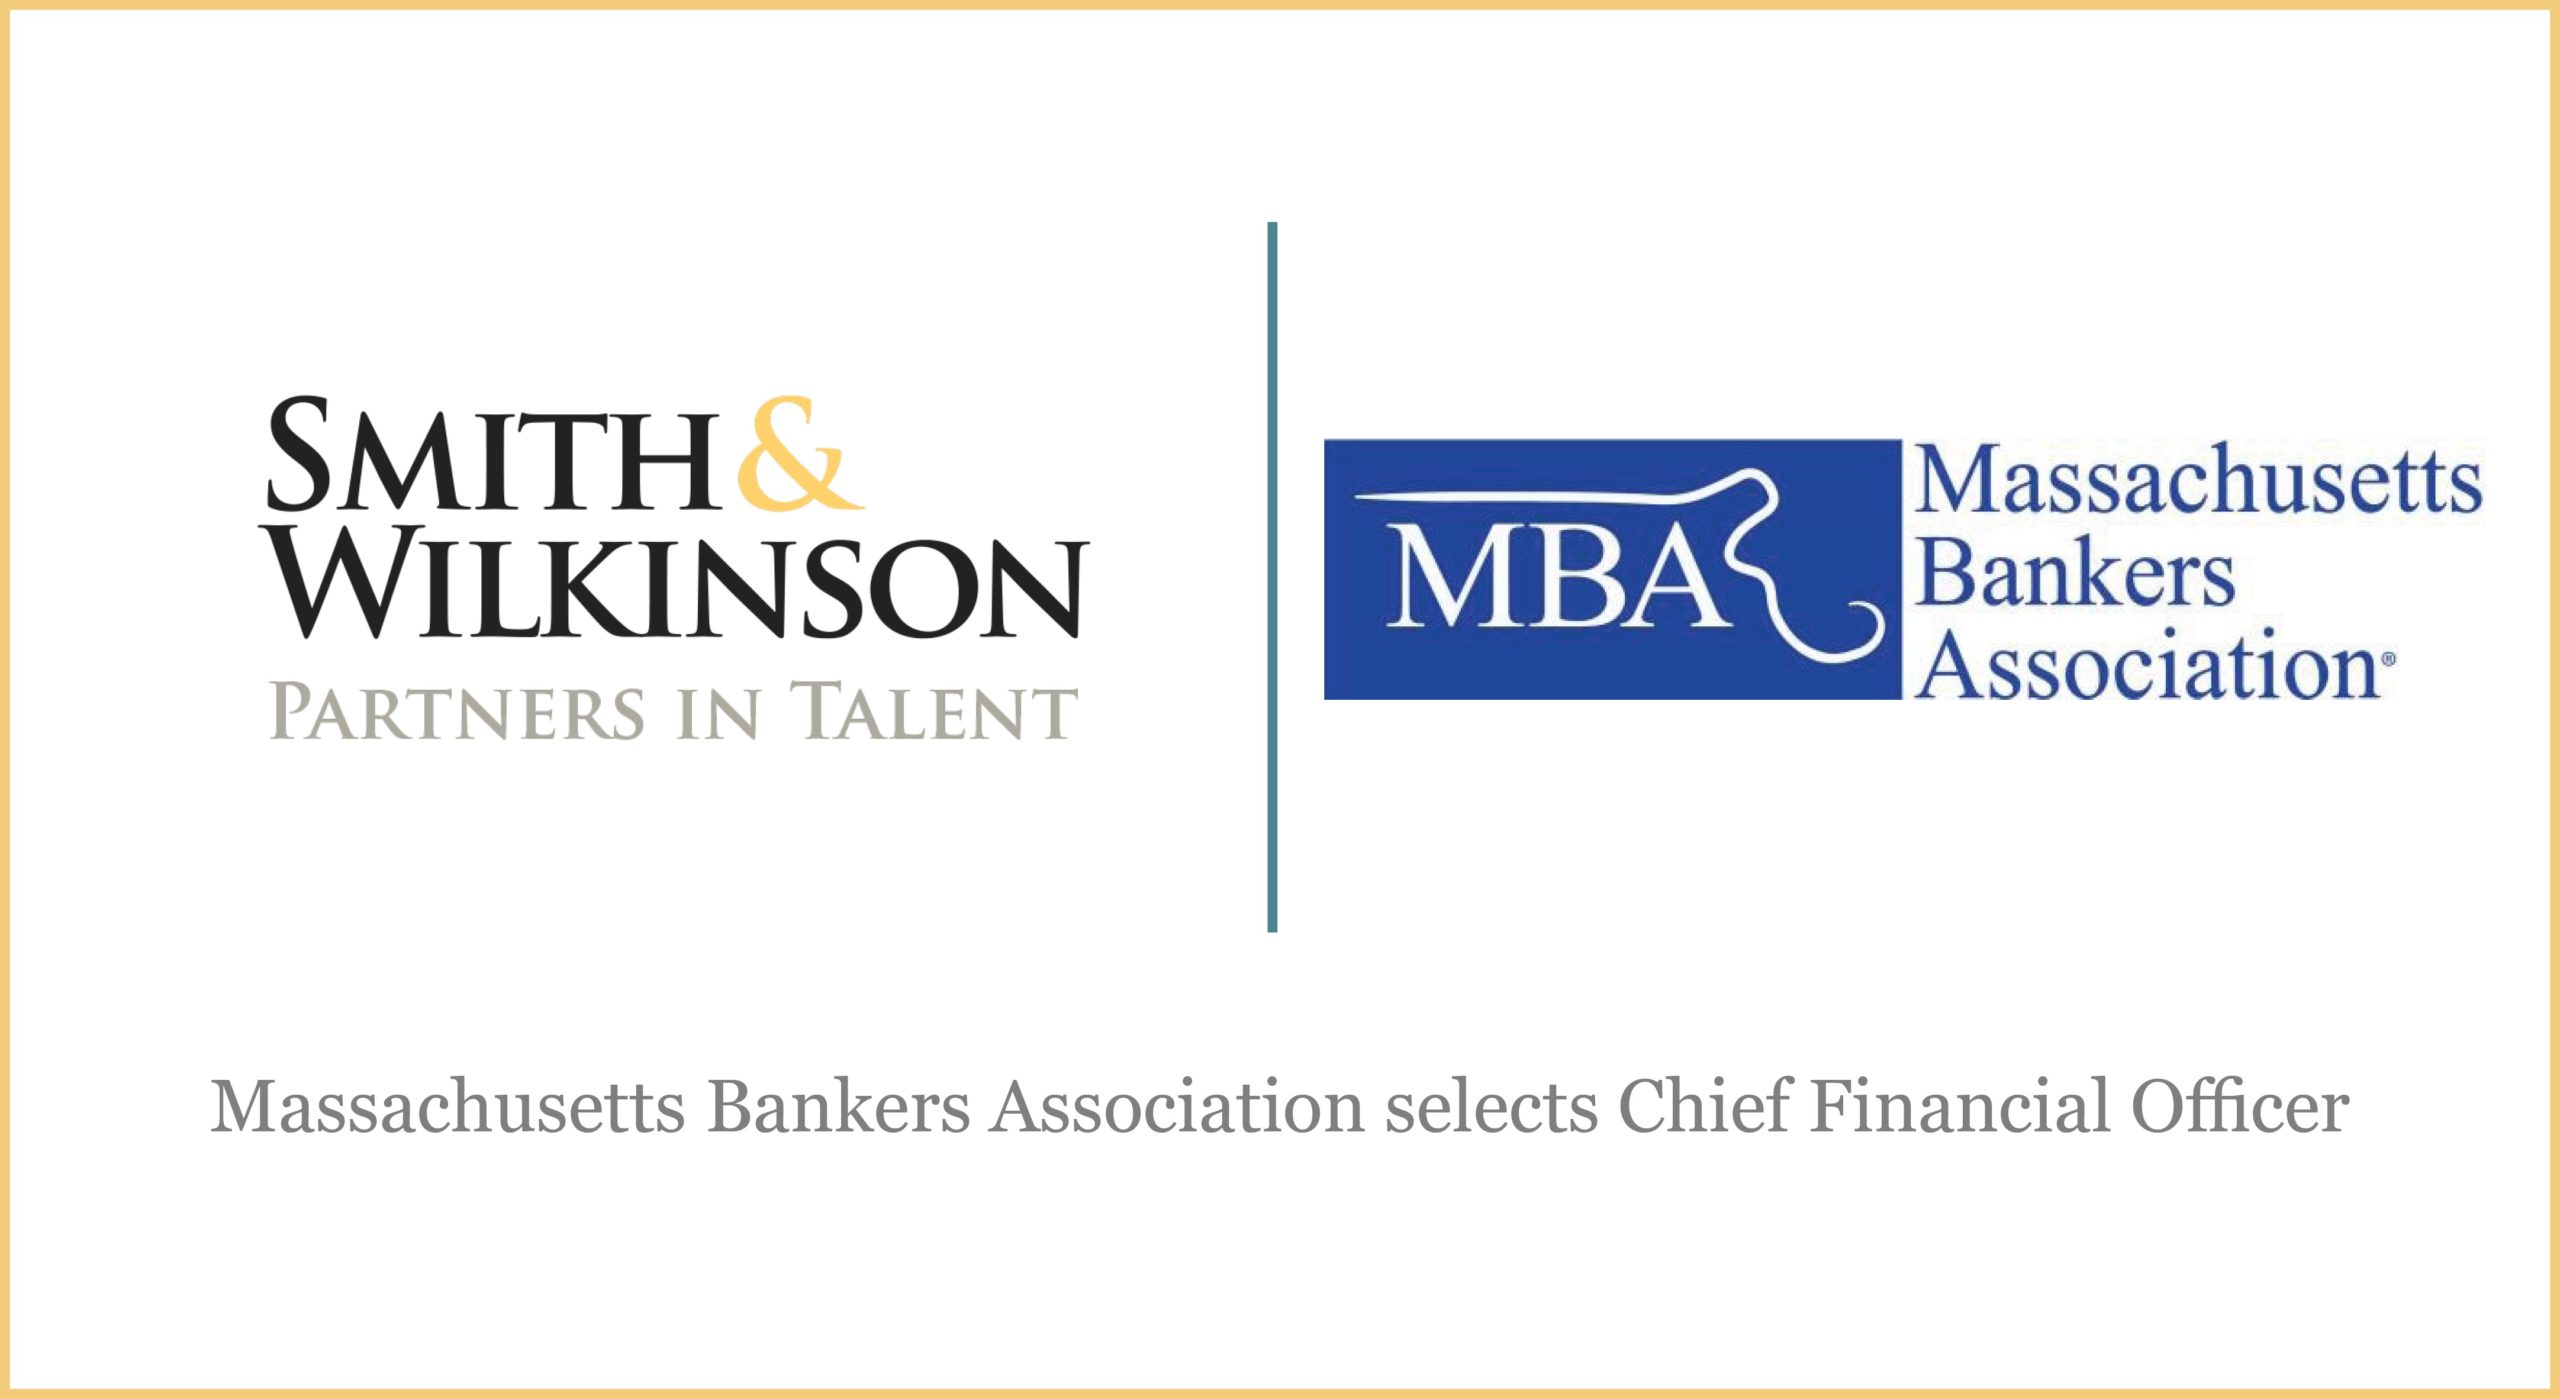 smith & wilkinson co-brand logo with massachusetts bankers association